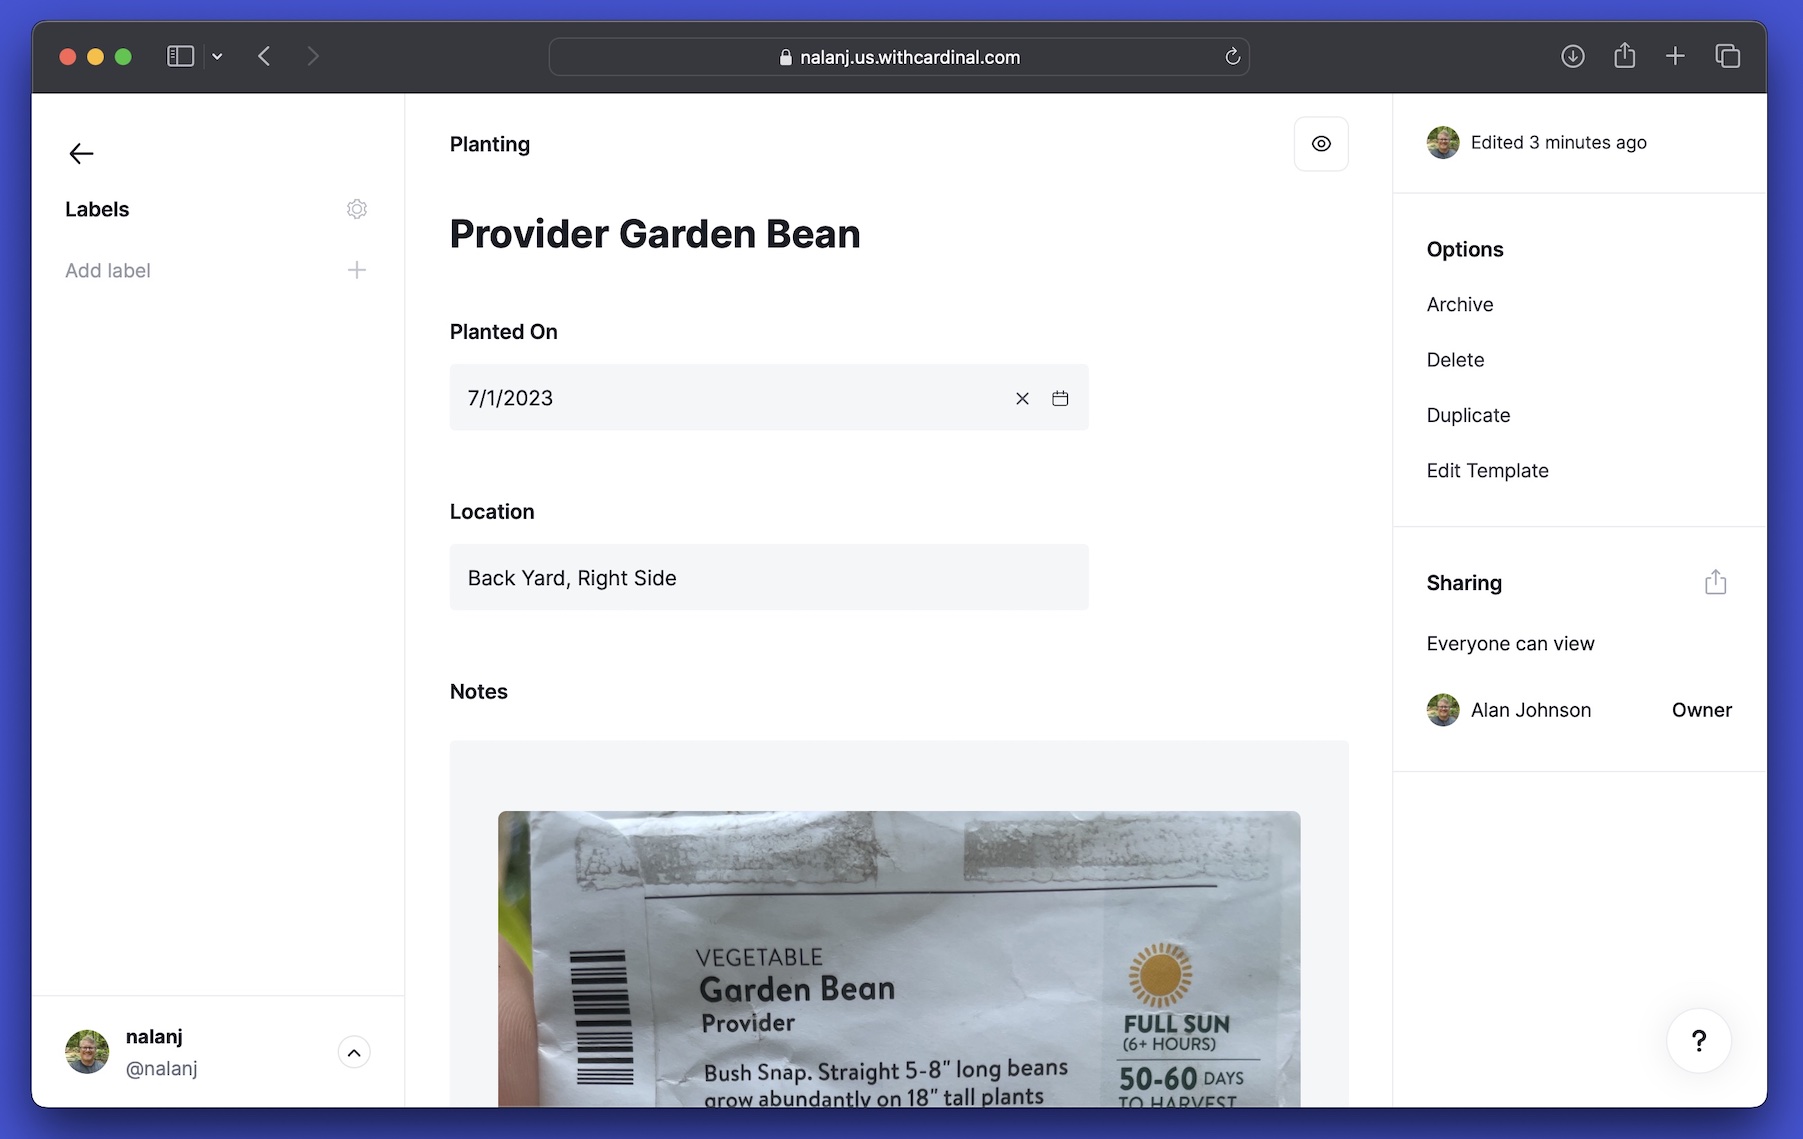 Image of Planting card in Cardinal